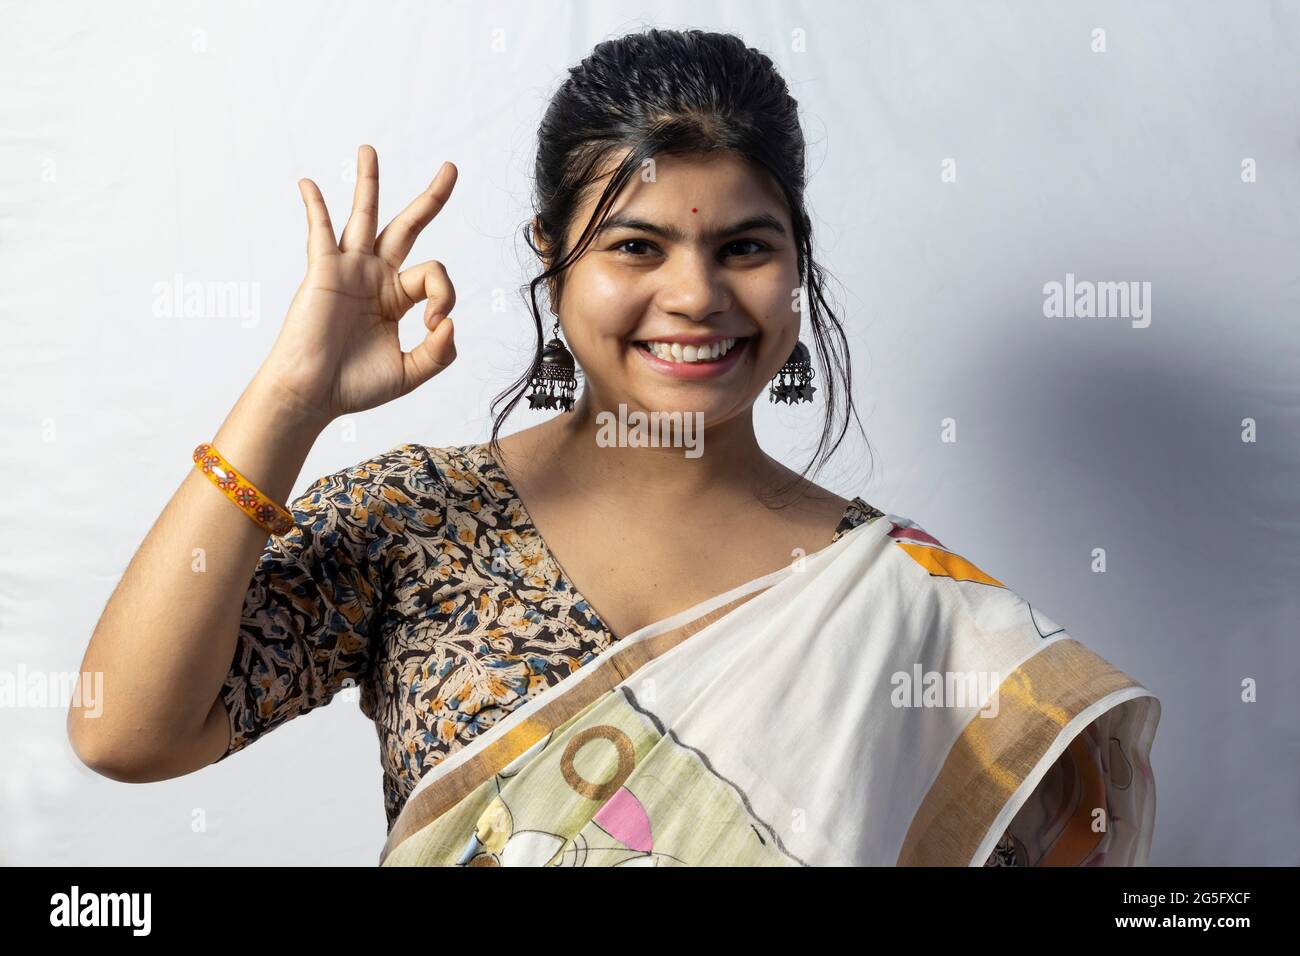 Isolated on white background an Indian female in saree shows okay gesture with smiling face on white background Stock Photo